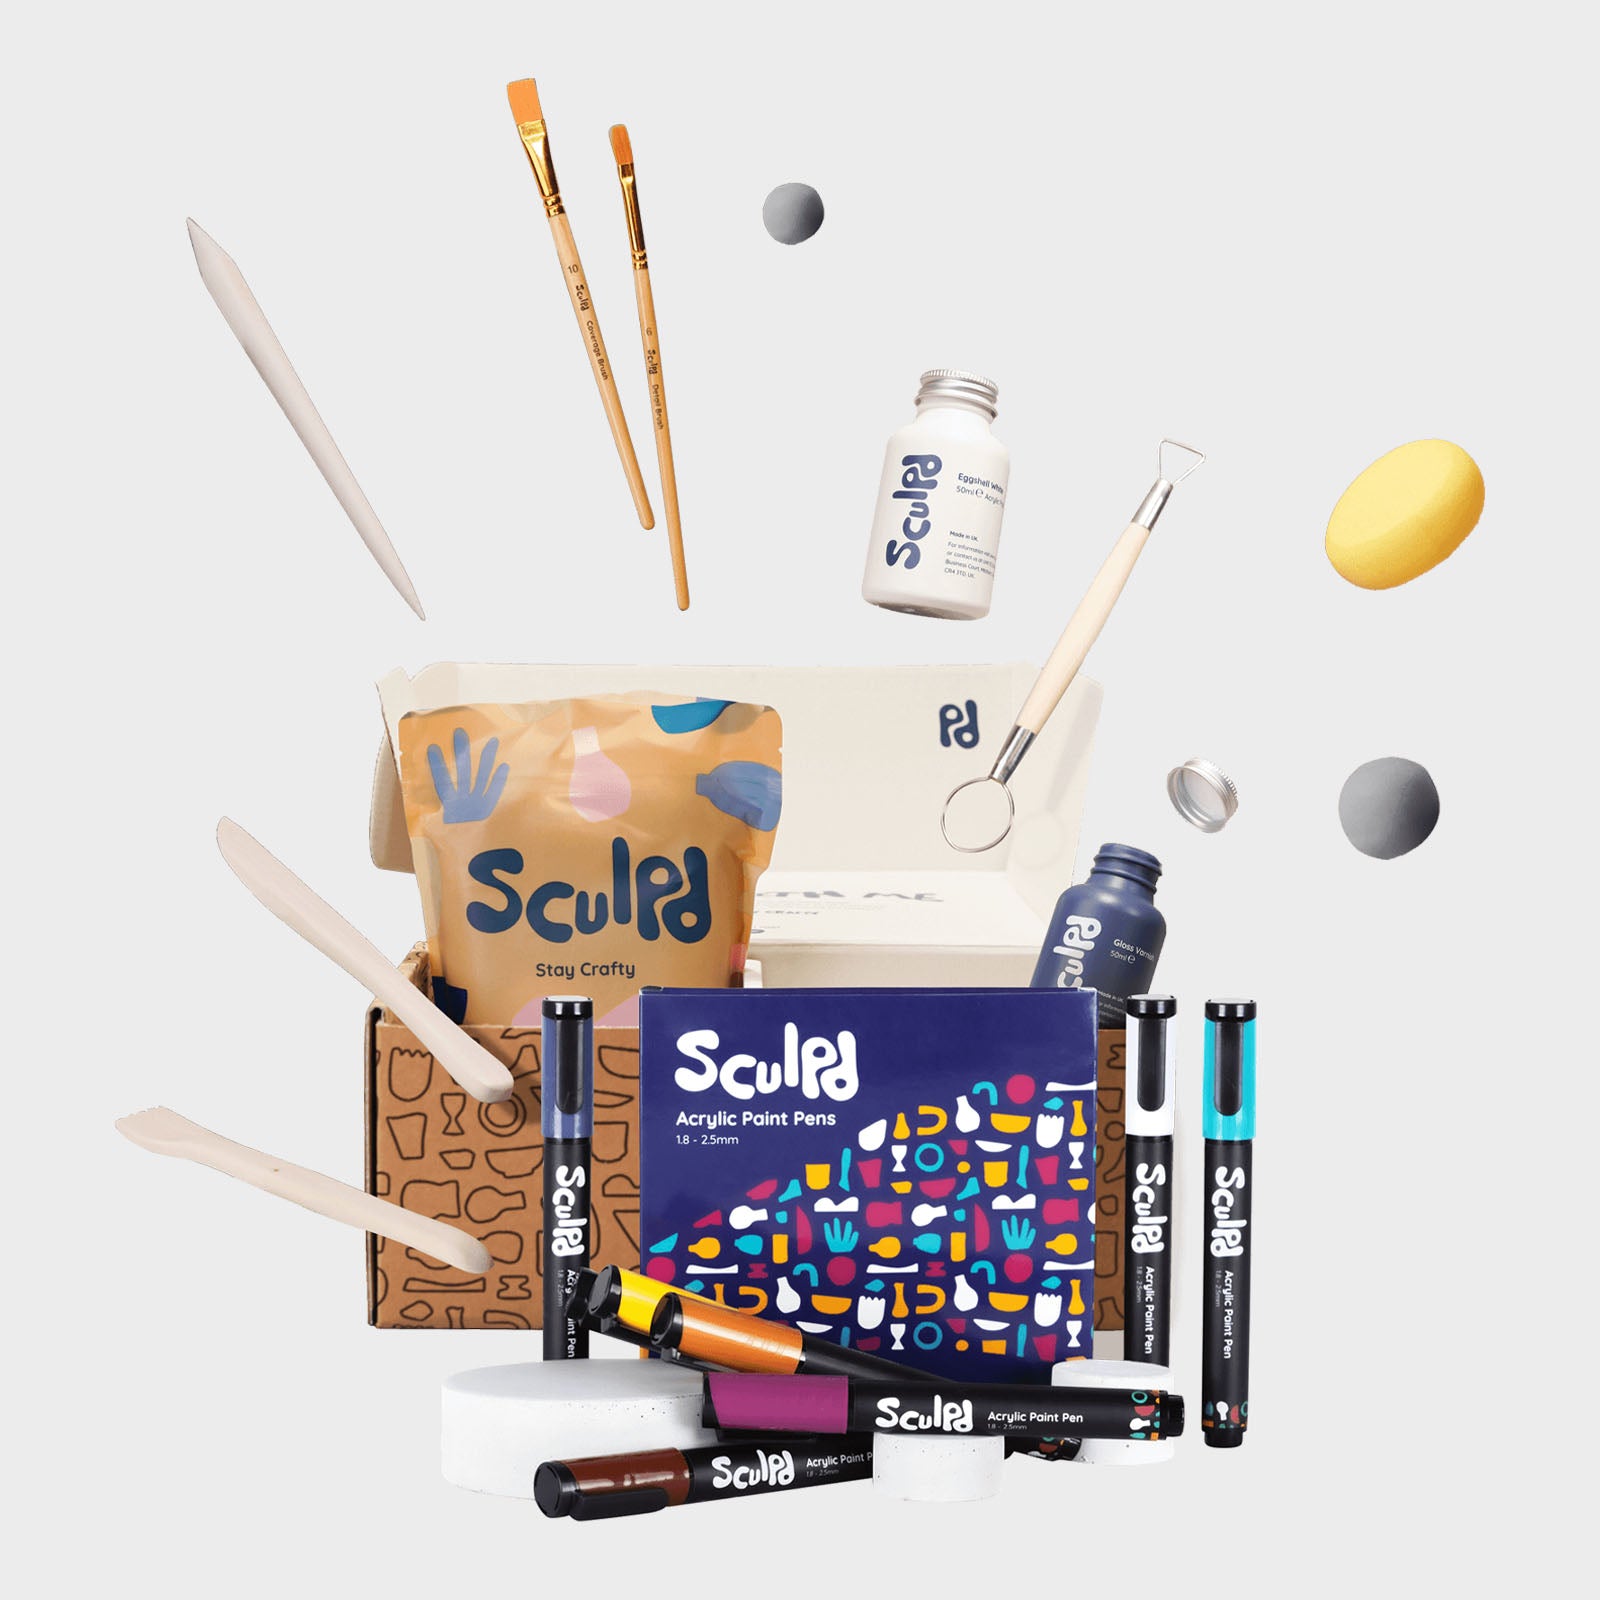 Sculpd Pottery Kit, Air Dry Clay Kit for Beginners with Jewel Paint Set,  Starter Bundles Includes a Pottery Tool Set, 8 Paints, Waterproof Varnish,  Paintbrushes, Sponge & 20 Piece Step-by-Step Guide 